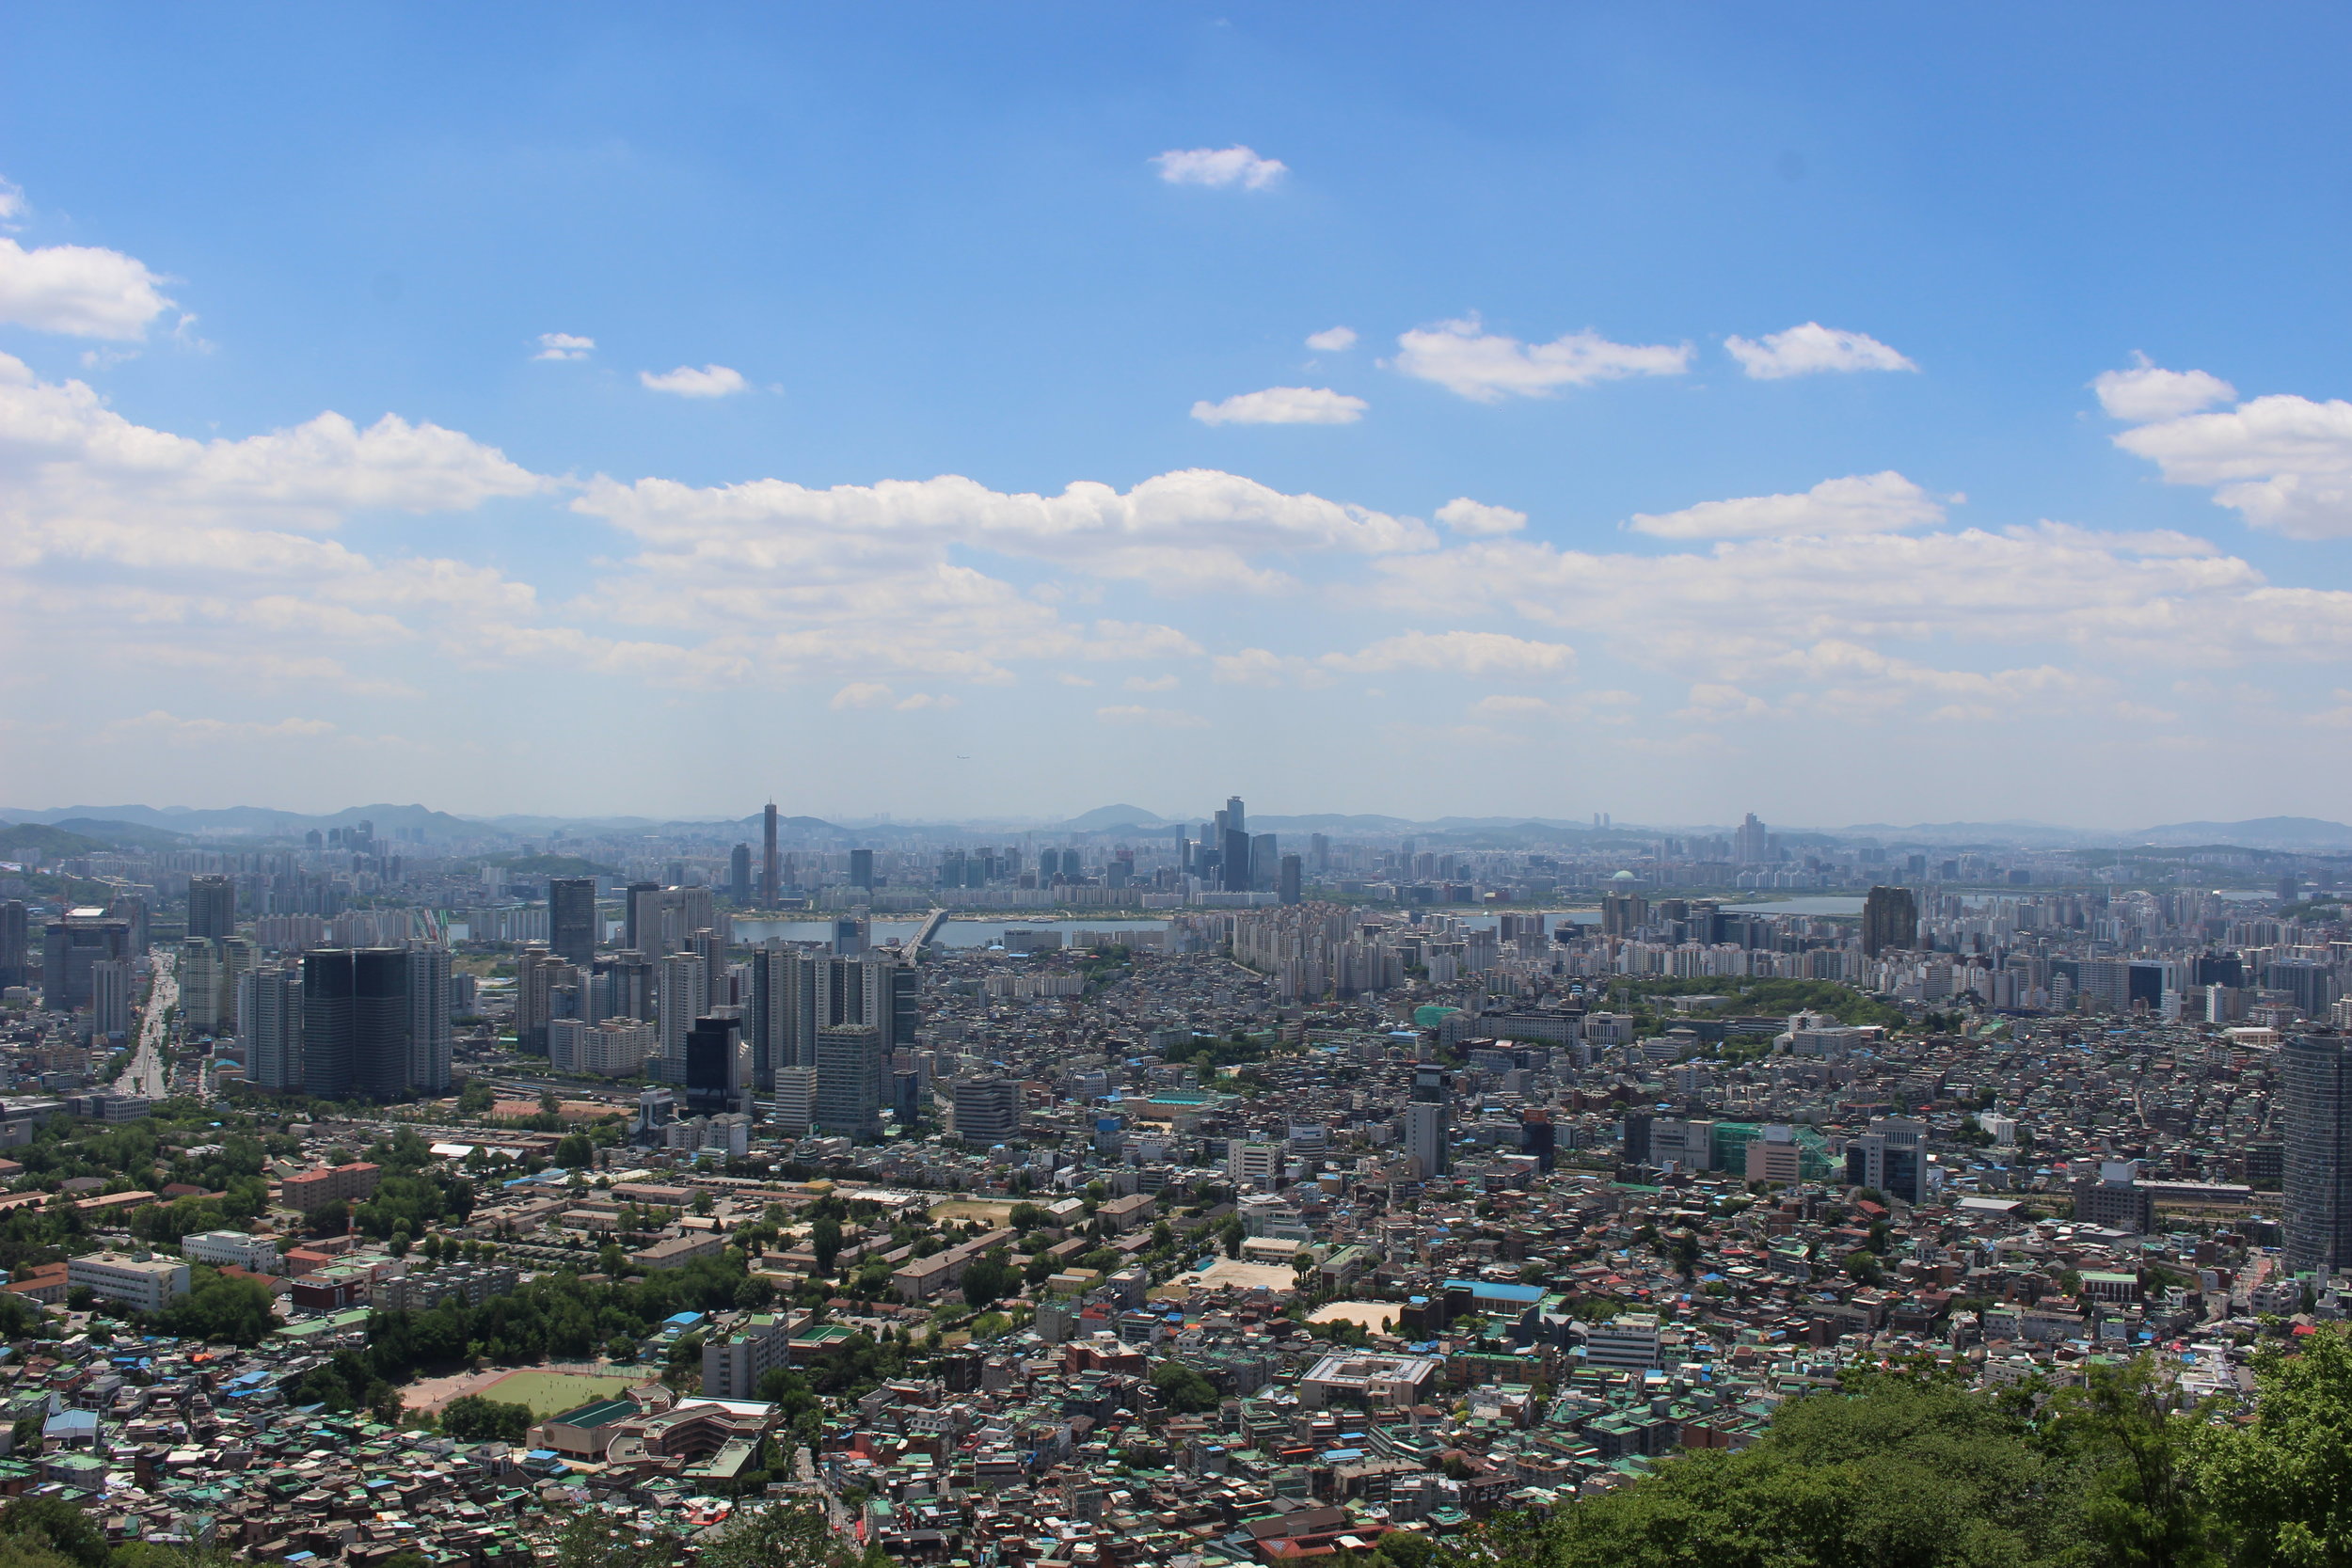  View of Seoul from Namsan Seoul Tower 